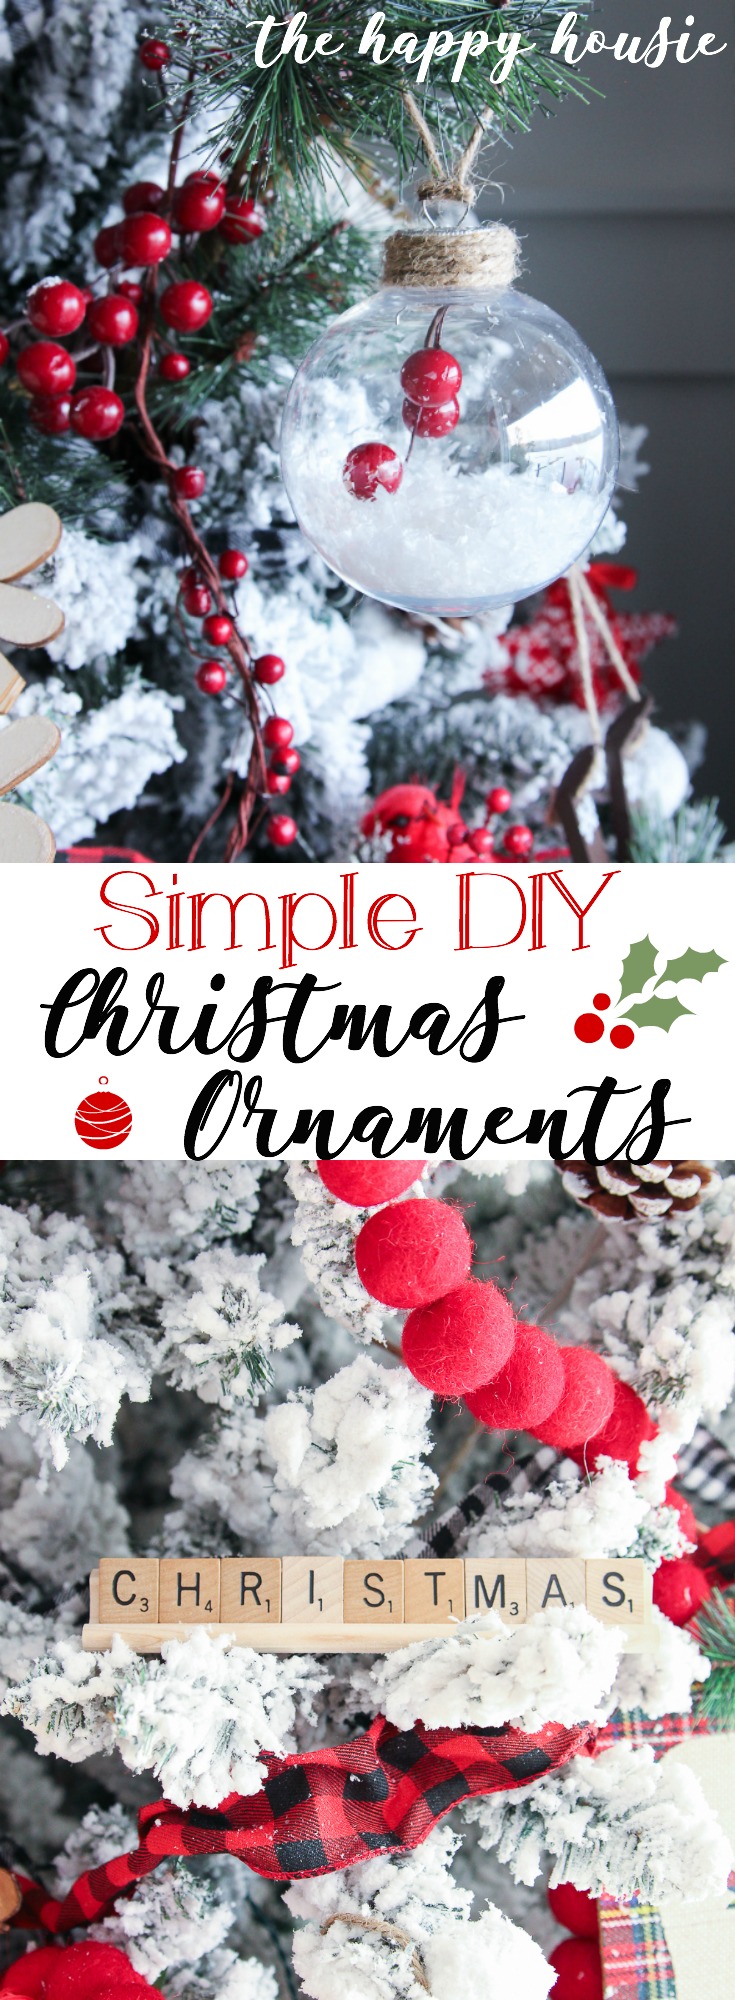 Simple DIY Christmas Ornaments poster.